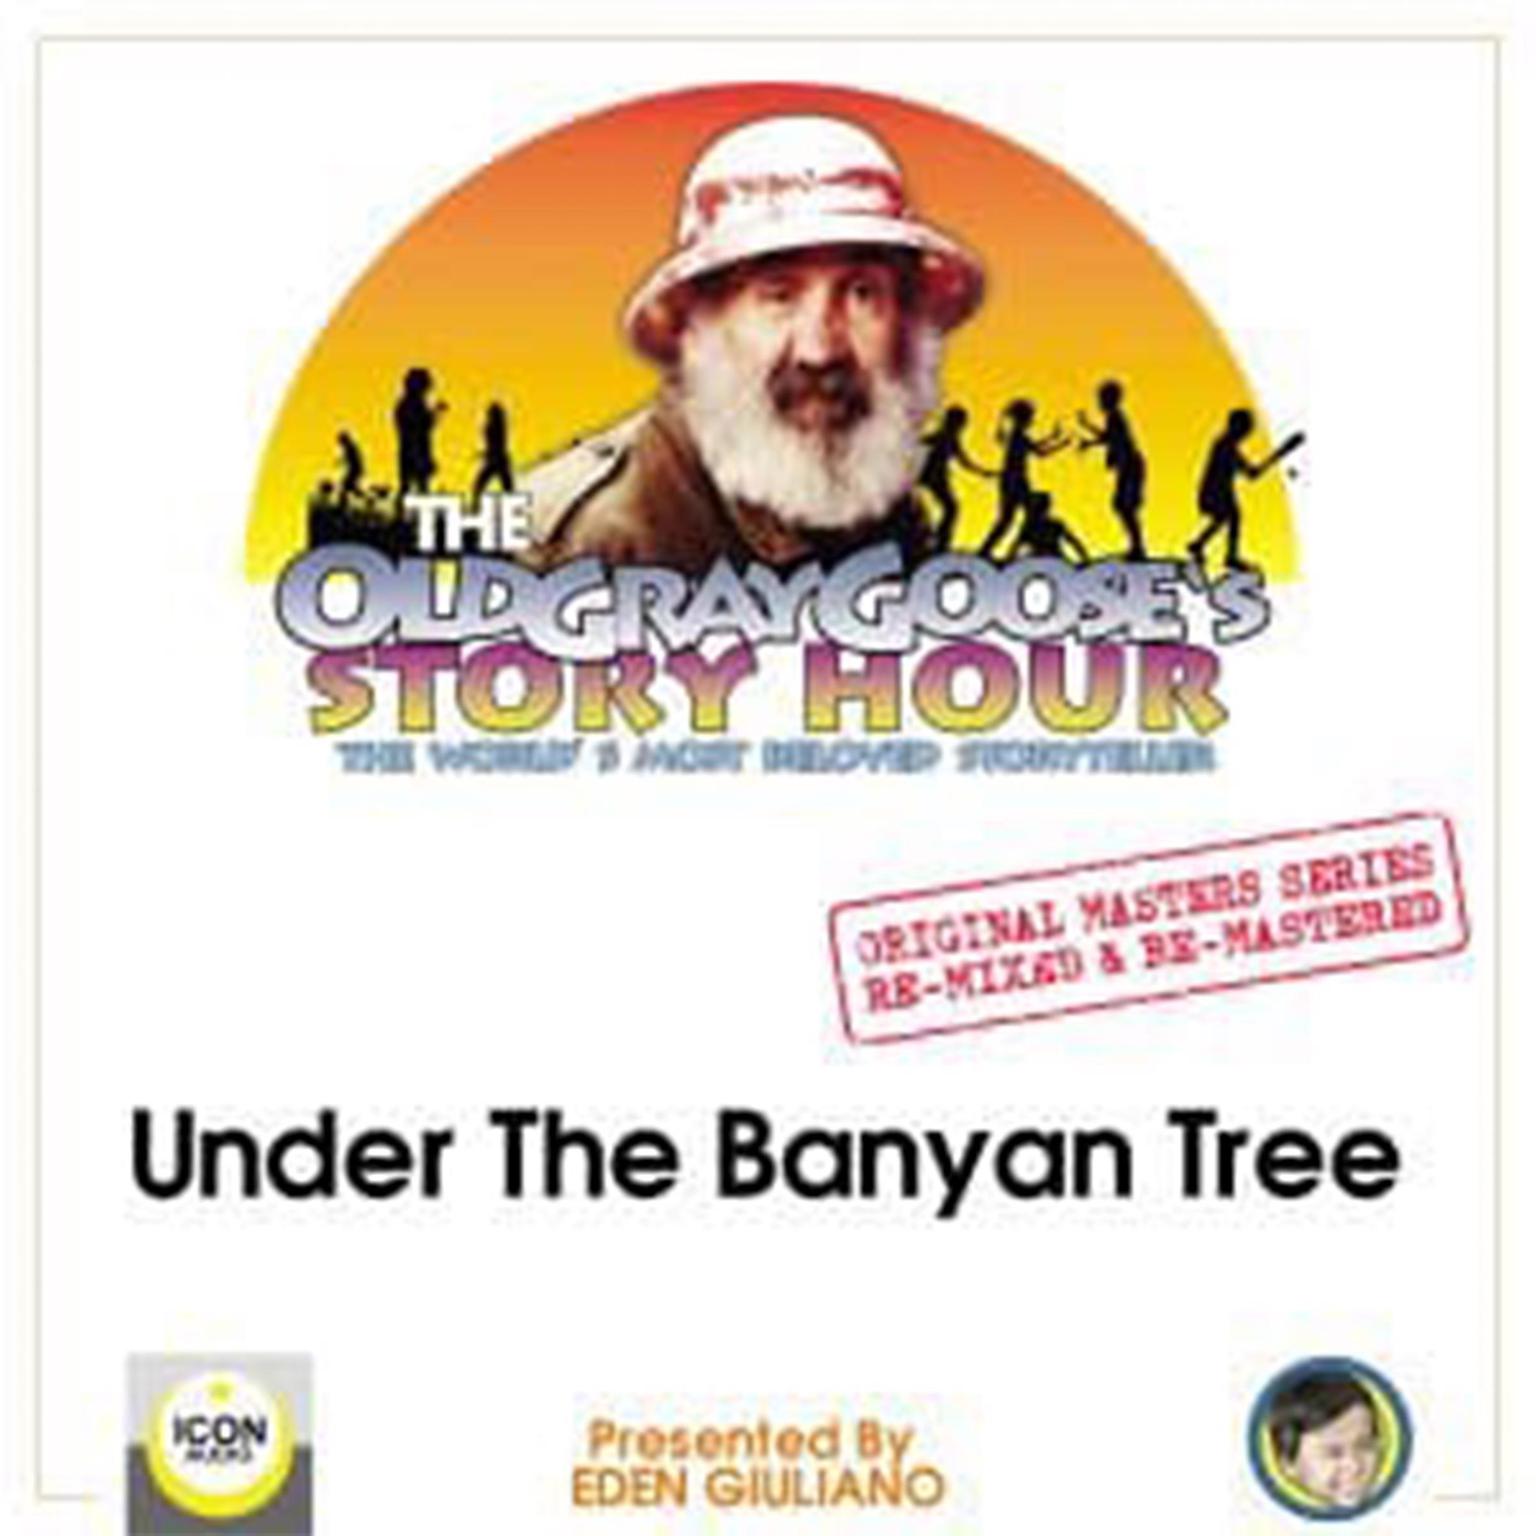 The Old Gray Gooses Story Hour; The Worlds Best Storyteller; Original Masters Series Re-mixed and Re-mastered; Under The Banyan Tree  Audiobook, by Eden Giuliano